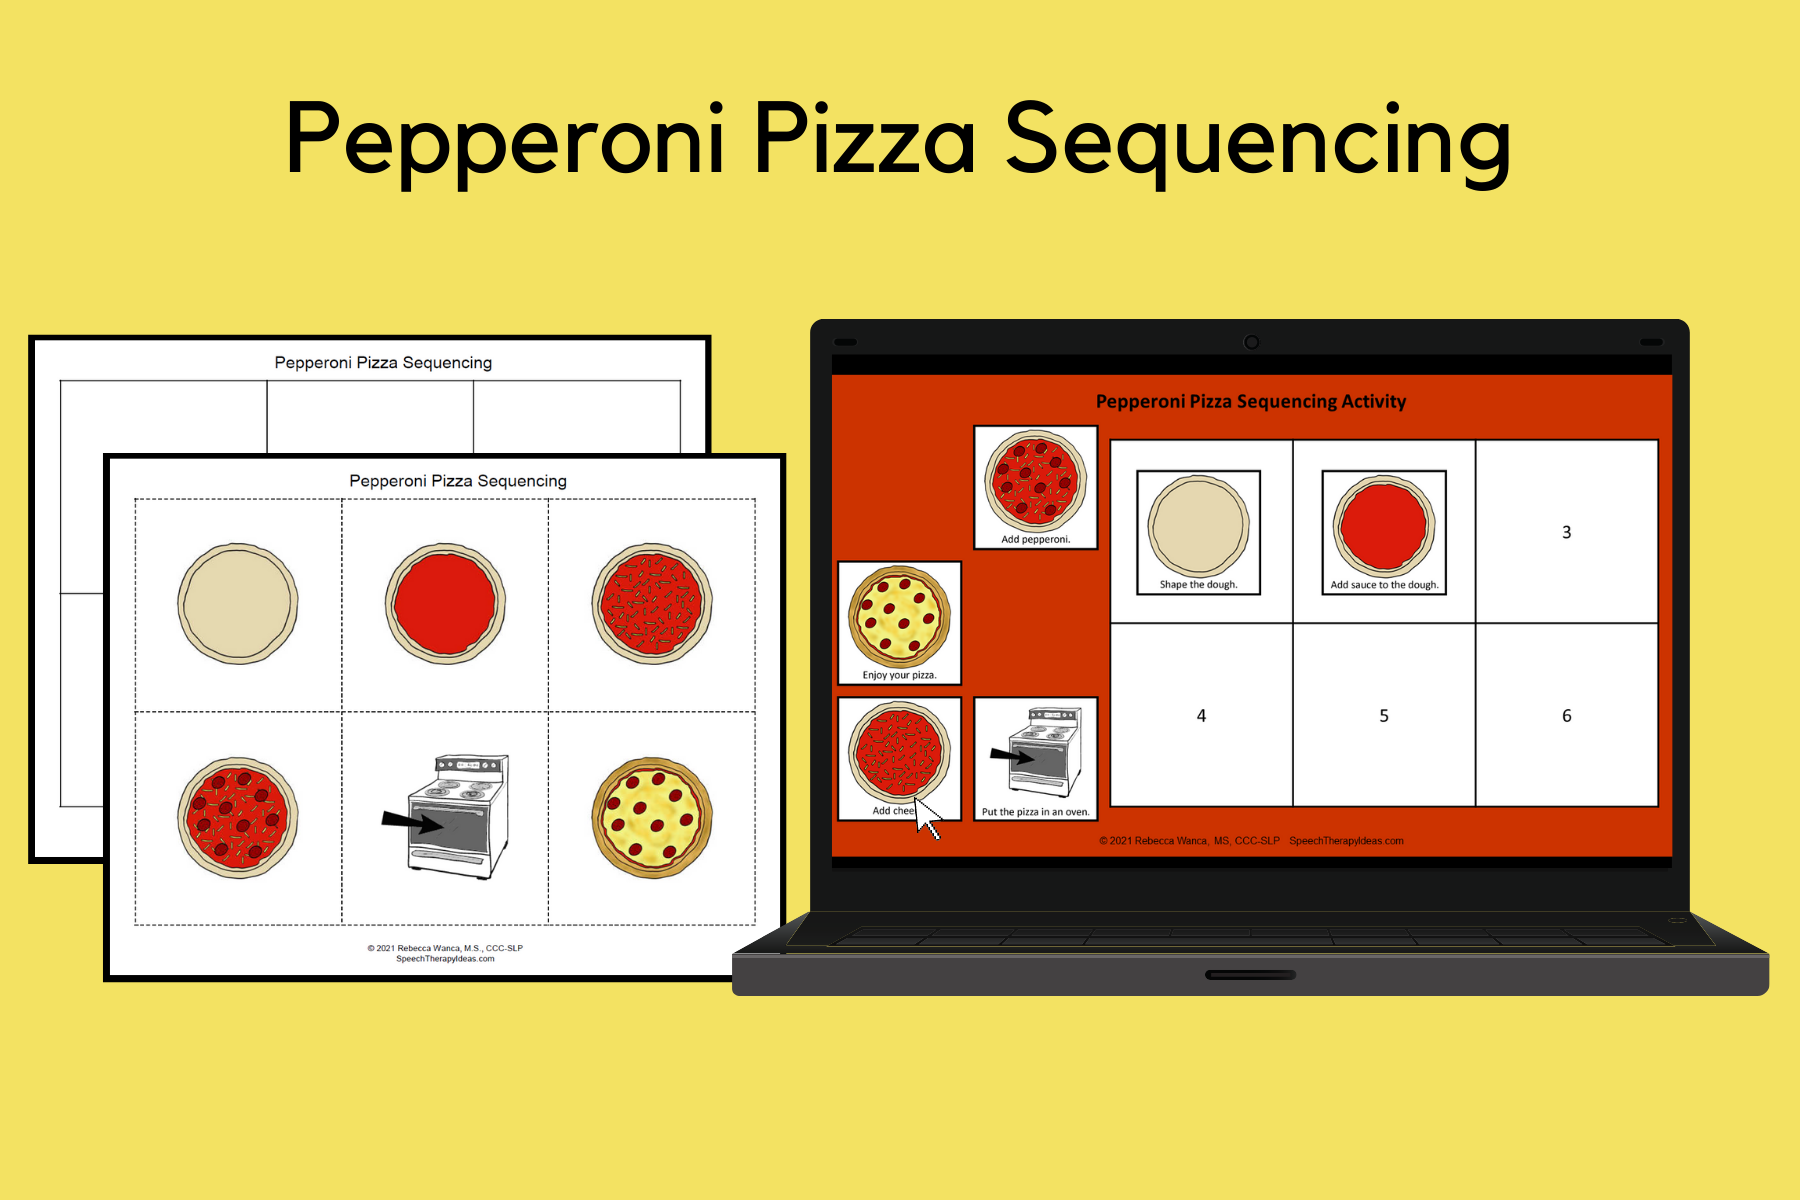 Pepperoni Pizza Sequencing Activity